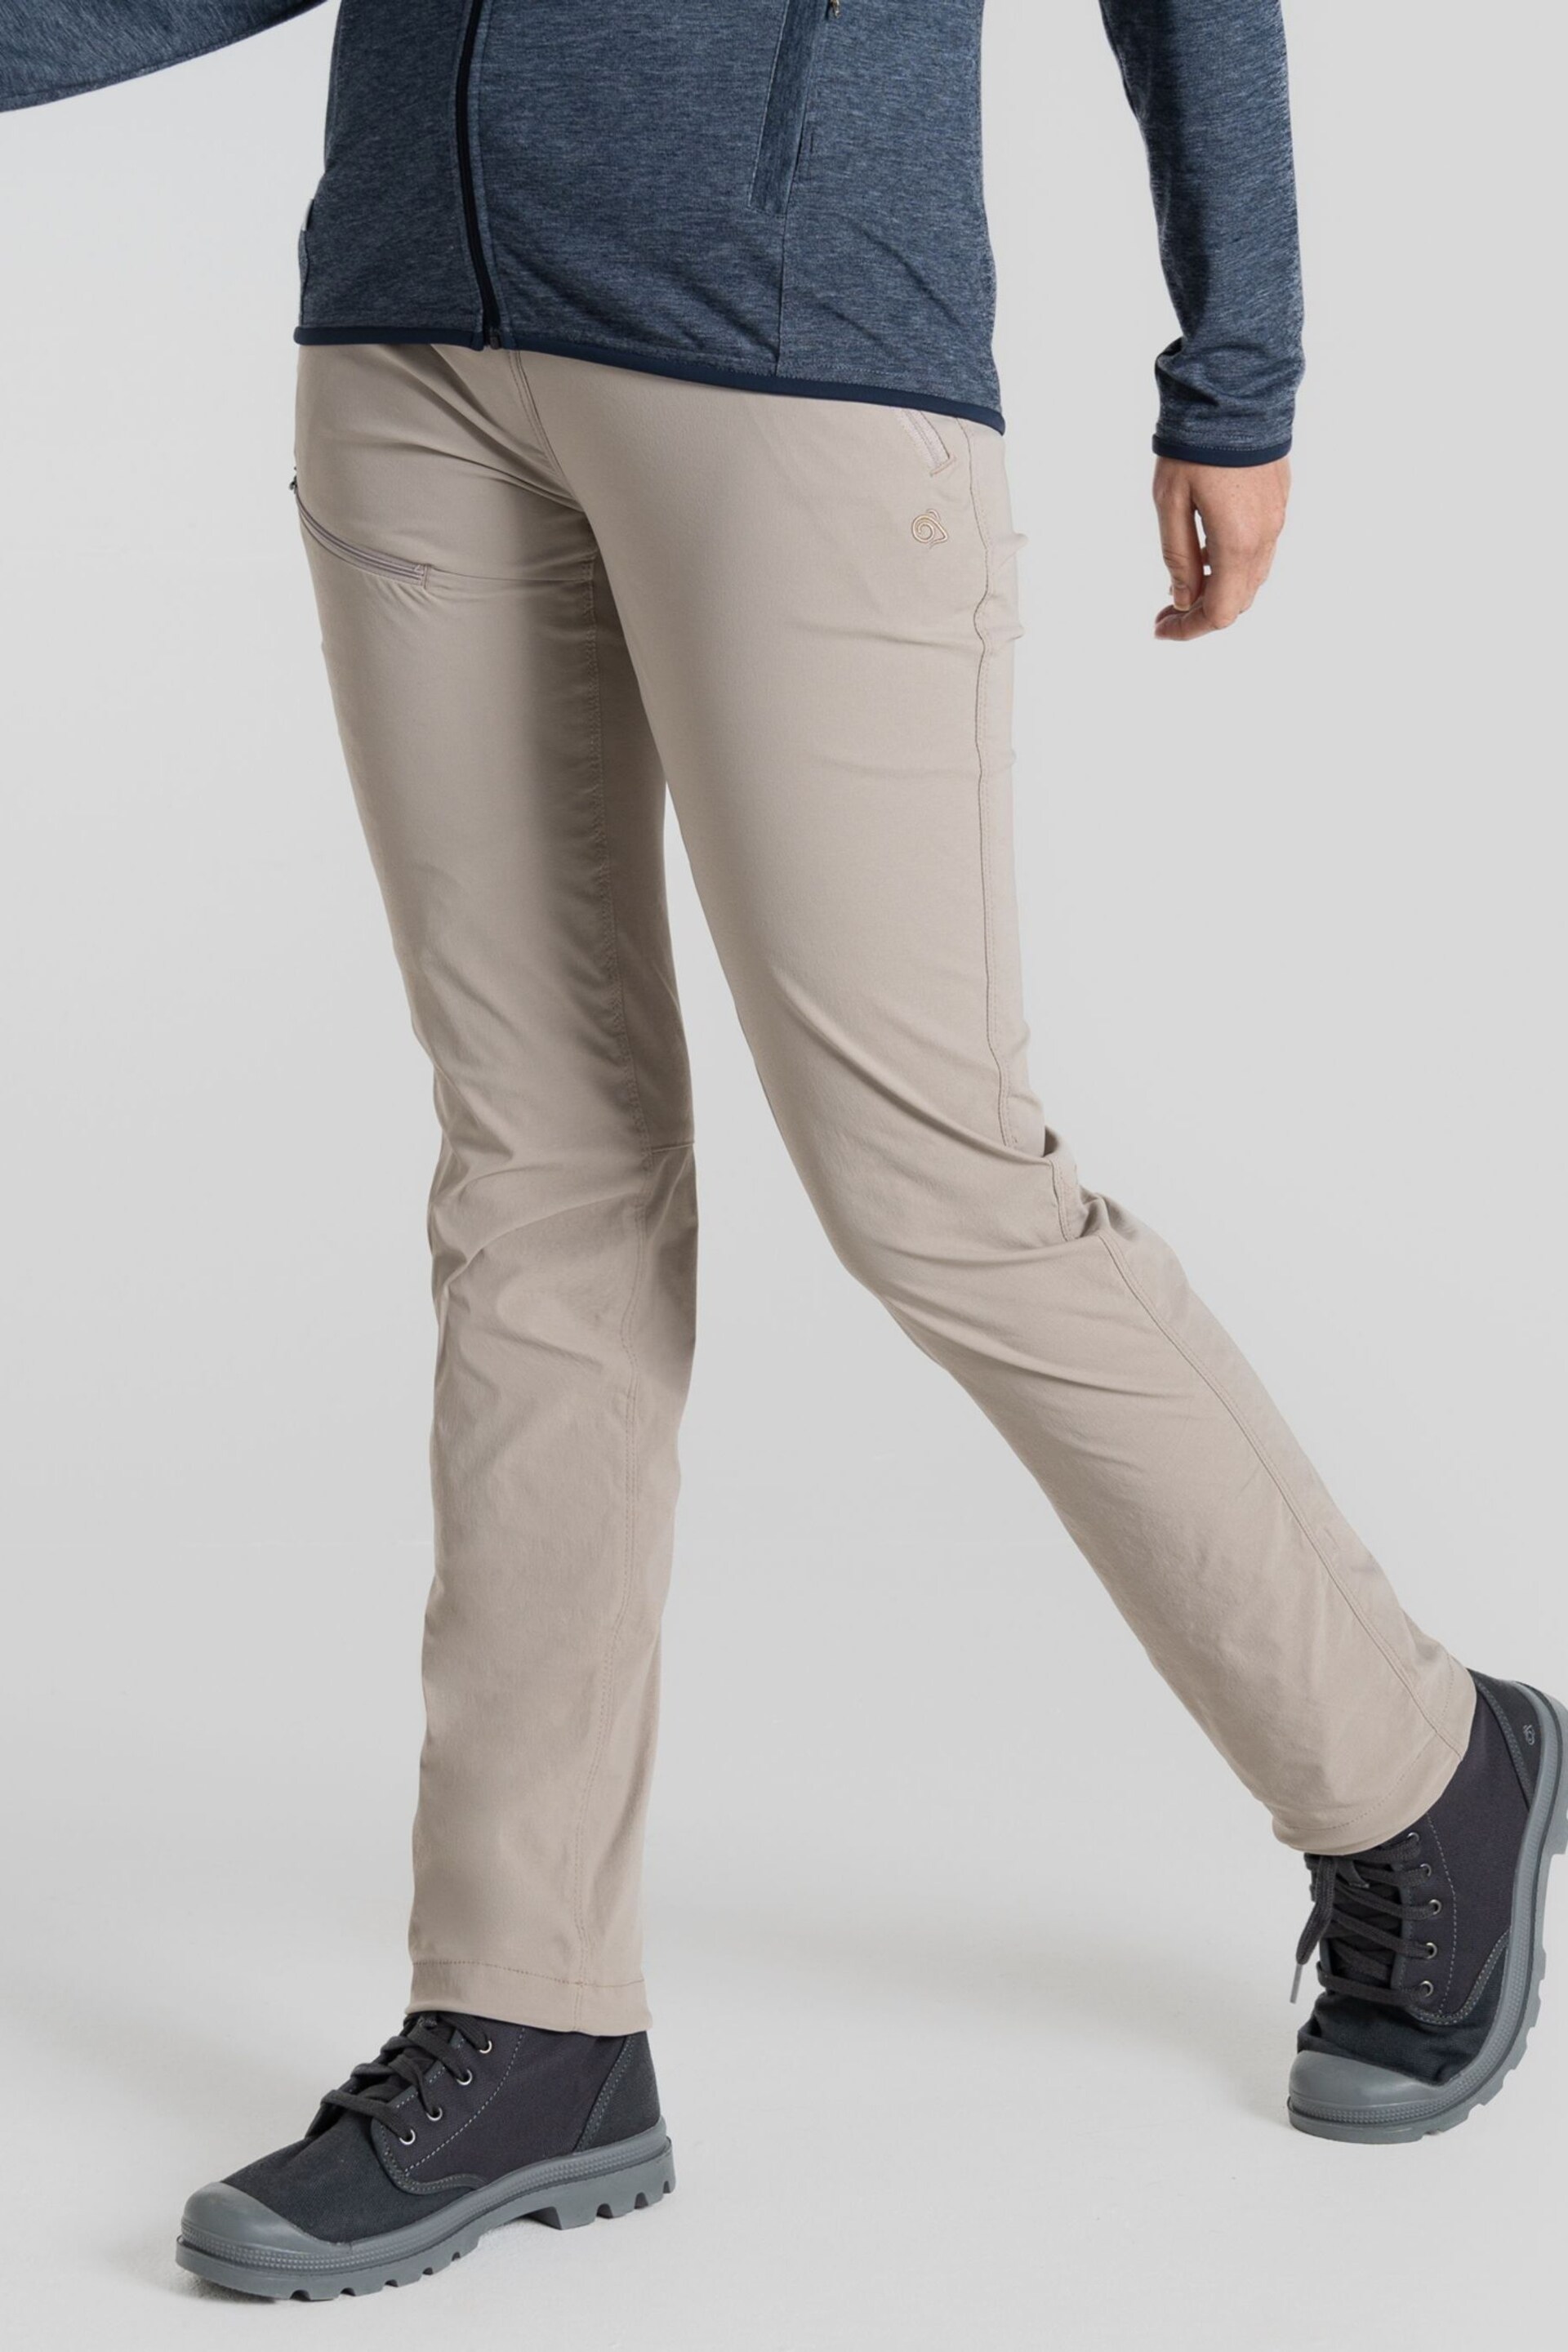 Craghoppers PRO III Brown Trousers - Image 6 of 7